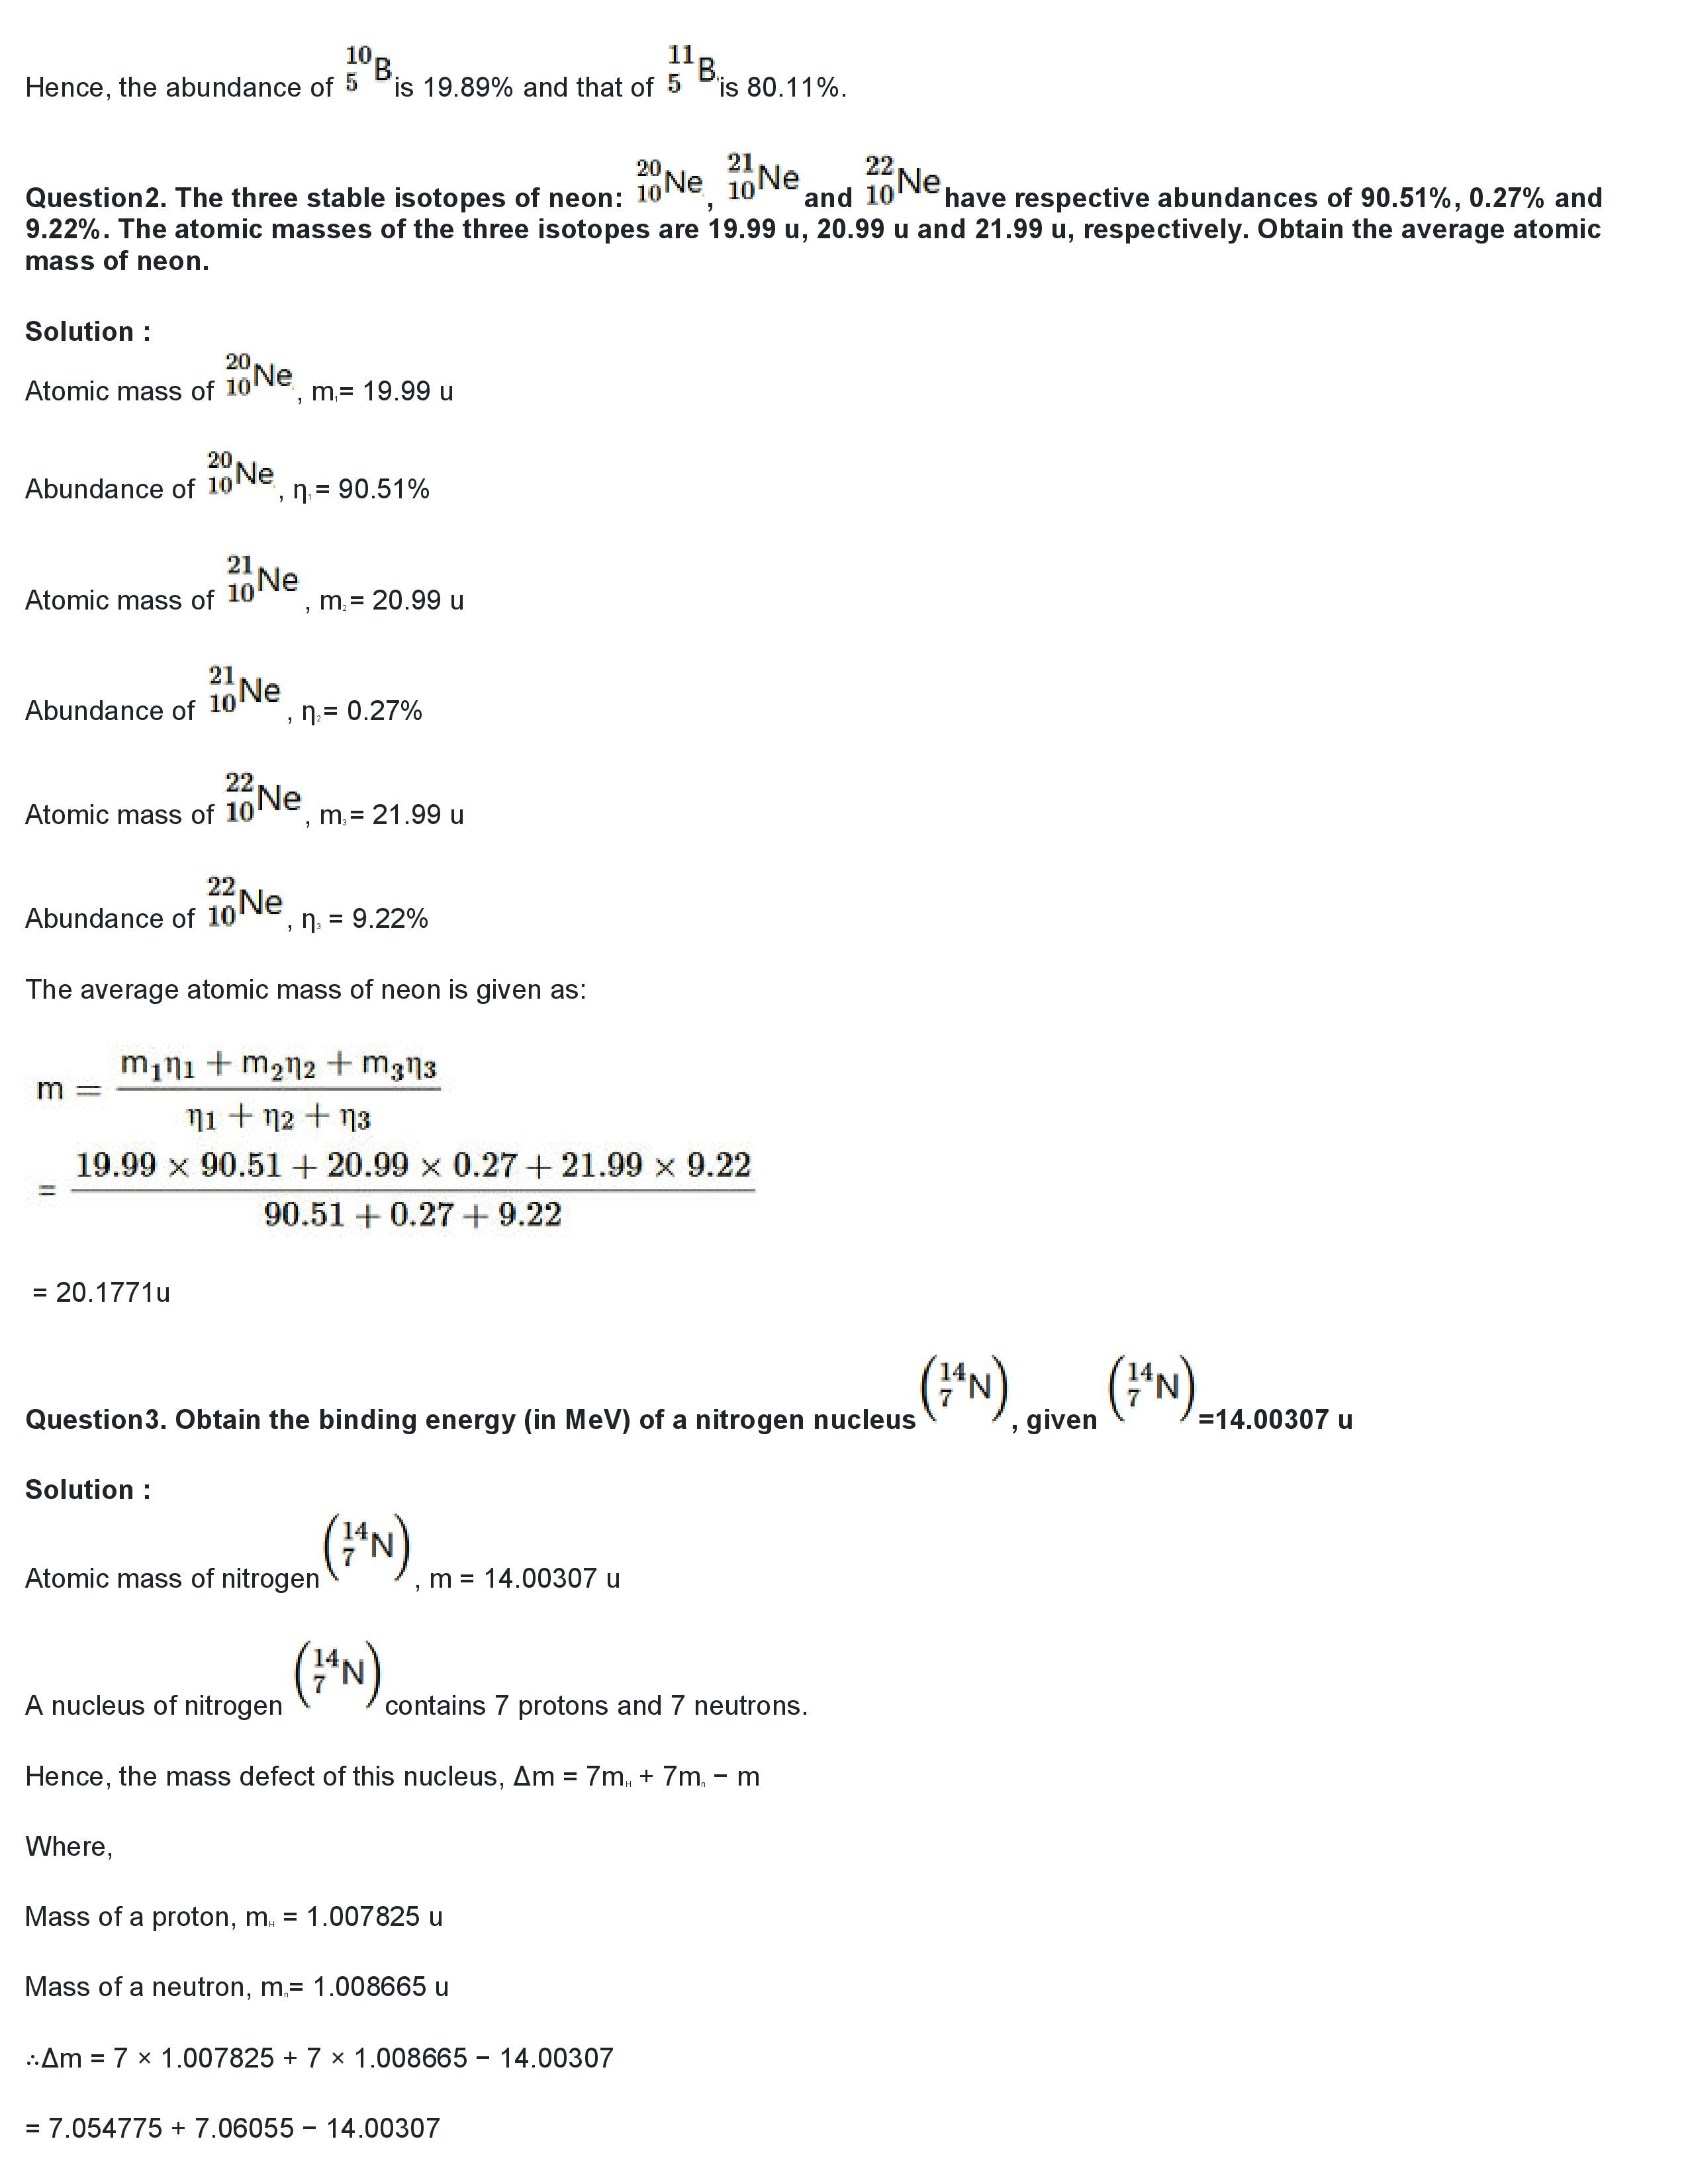 ""NCERT-Solutions-Class-12-Physics-Chapter-13-Nuclei-2